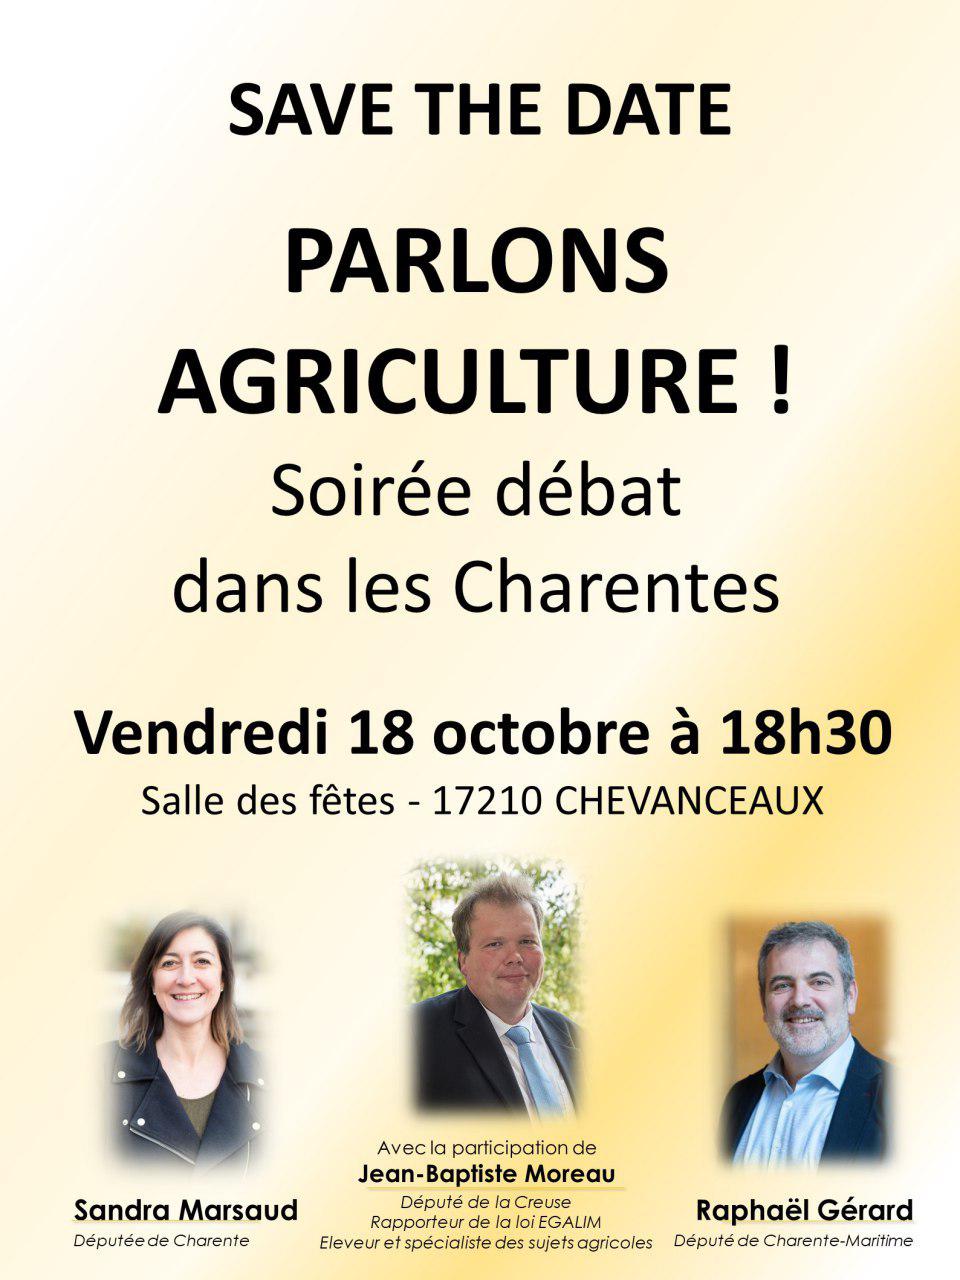 Parlons agriculture